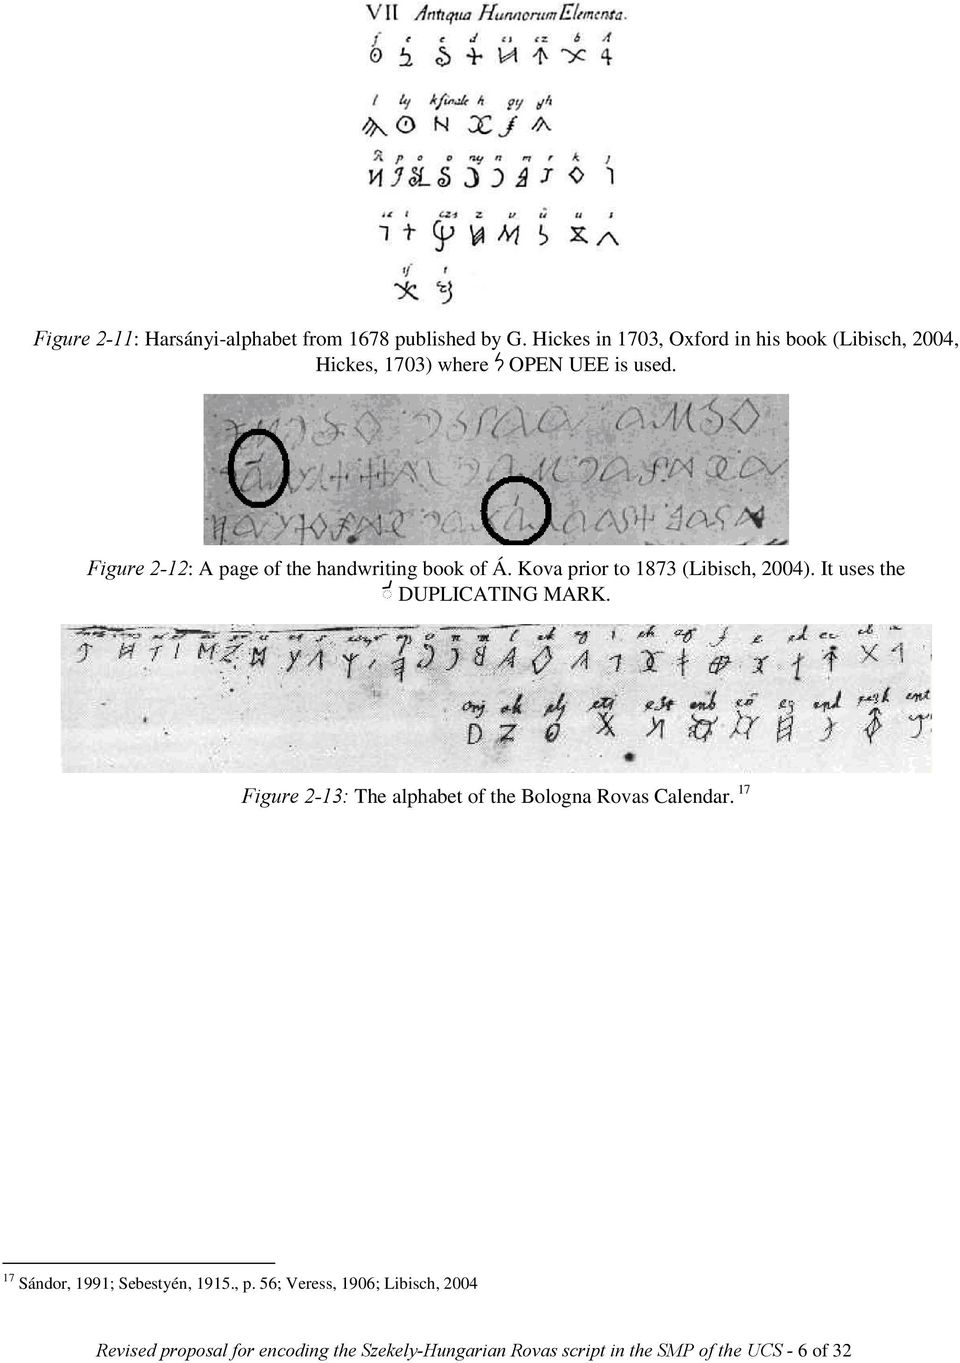 Figure 2-12: A page of the handwriting book of Á. Kova prior to 1873 (Libisch, 2004). It uses the b DUPLICATING MARK.